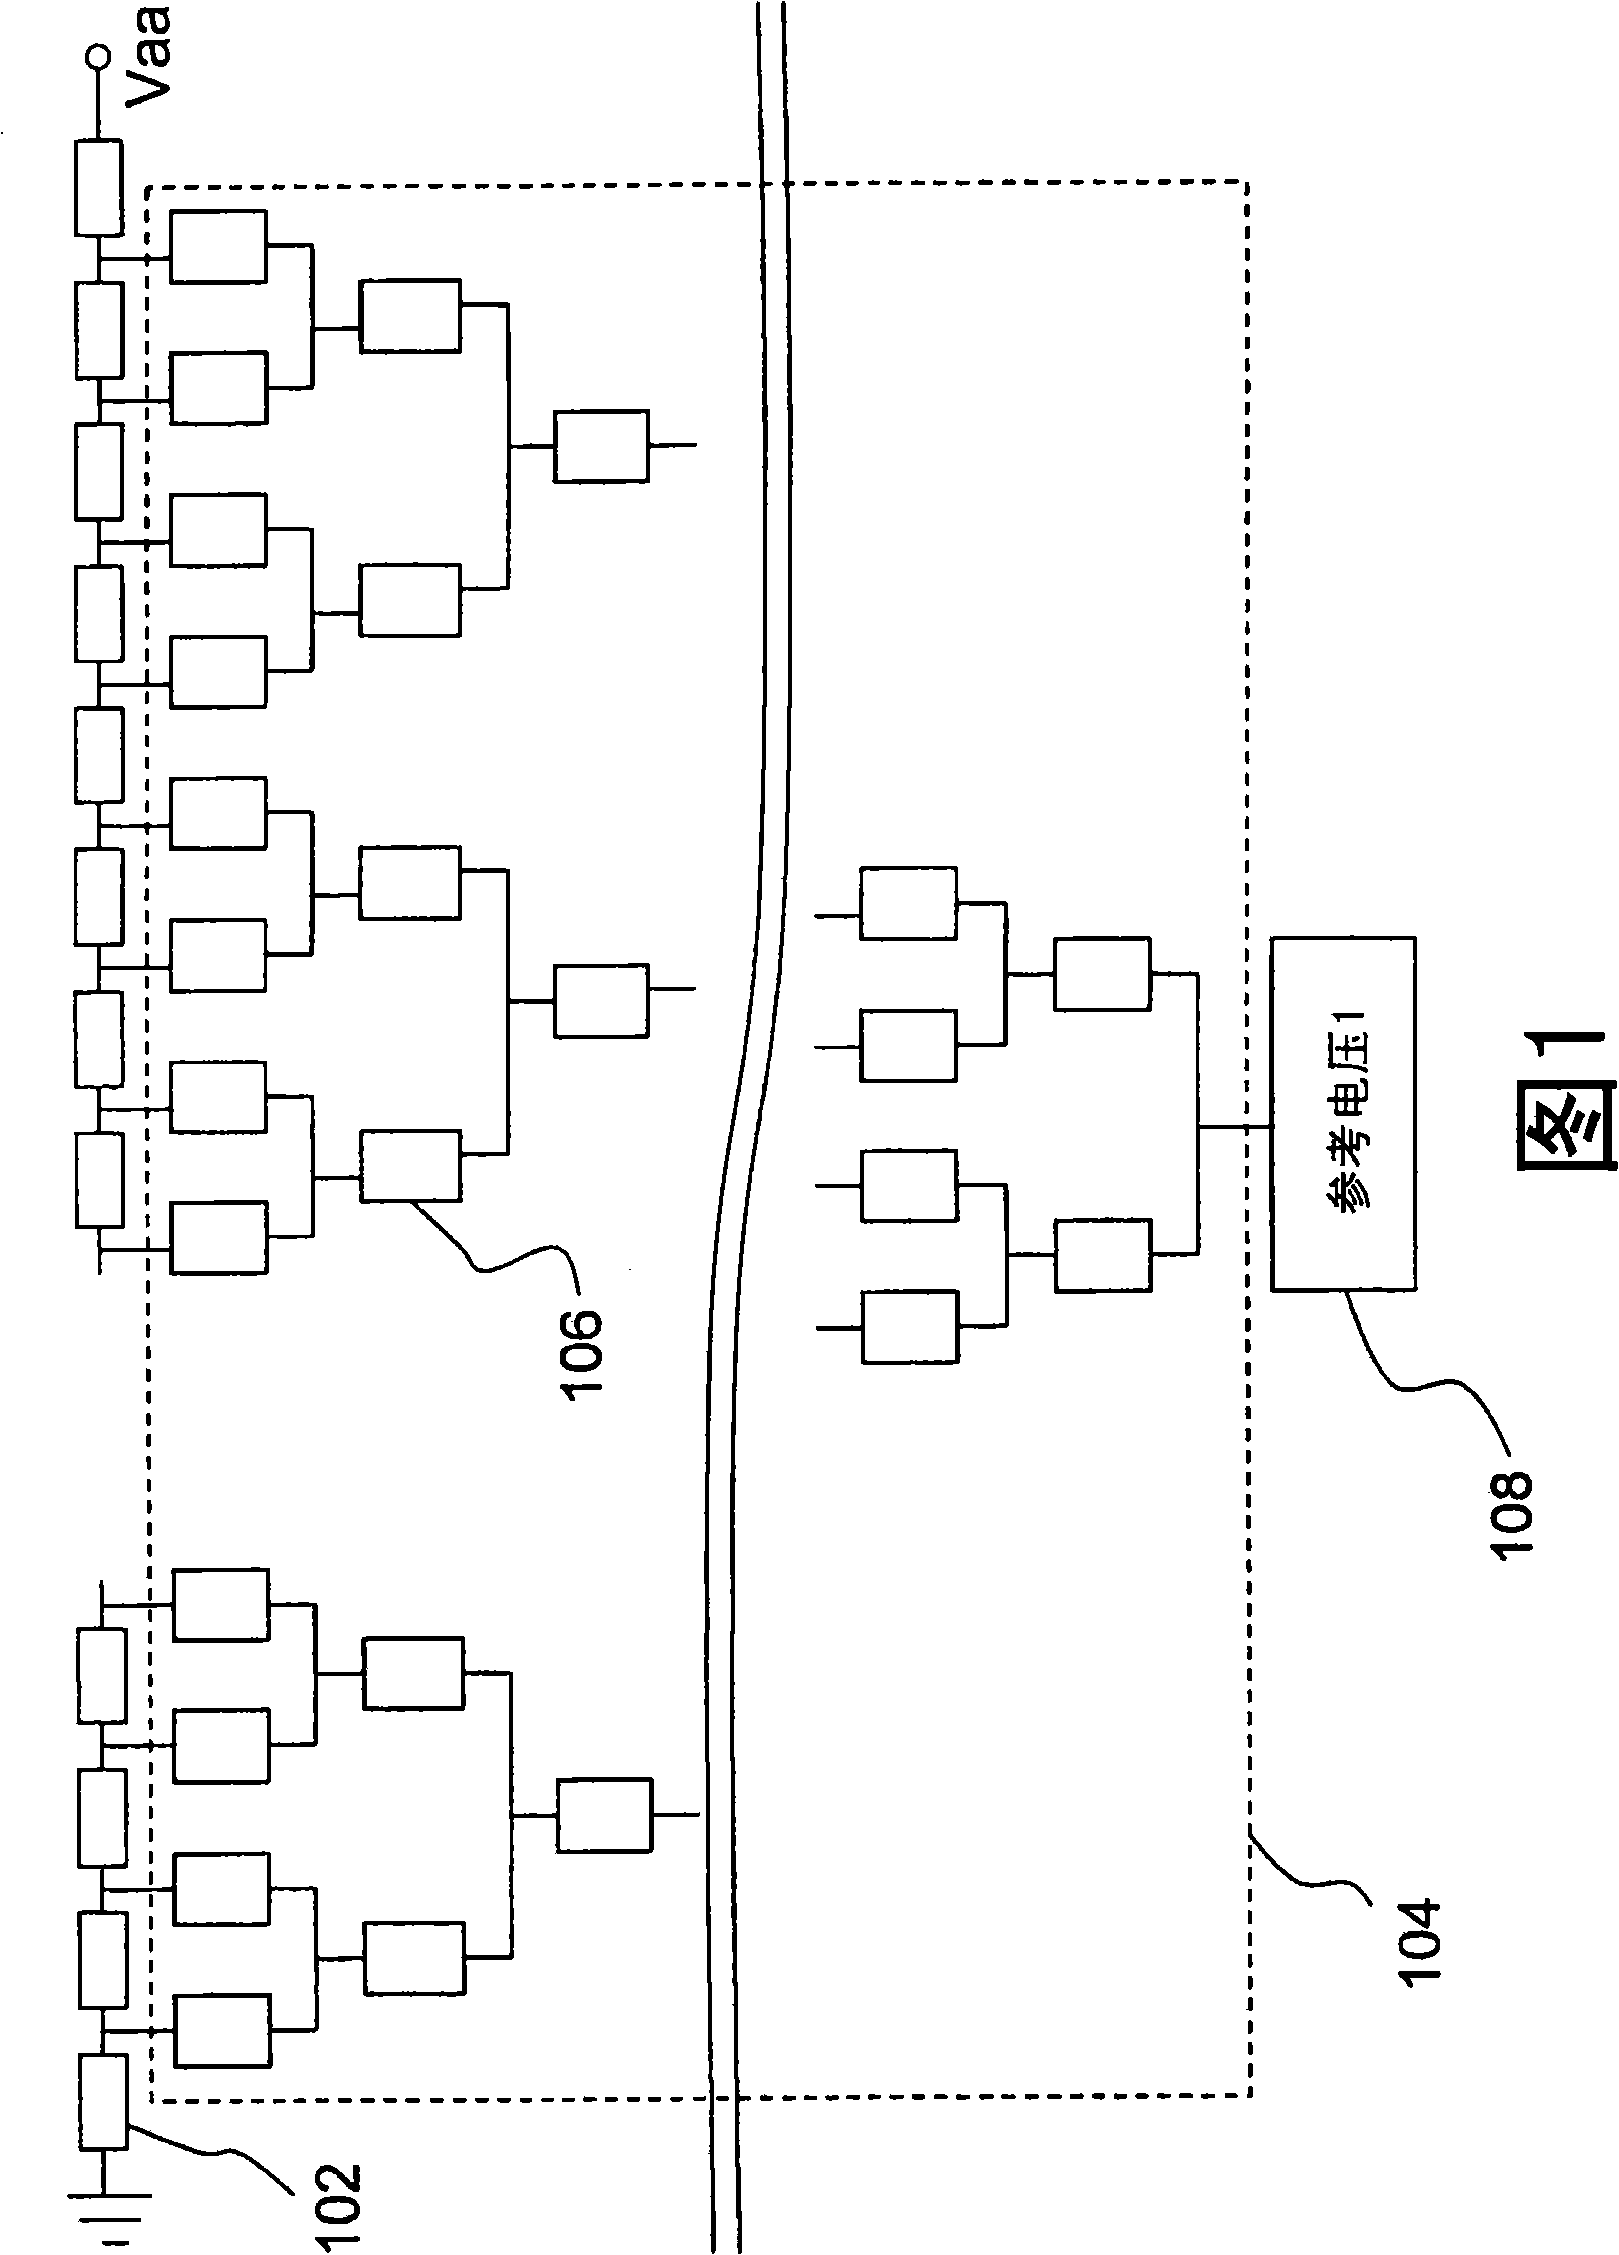 Non-linear D/A converter, applied LCD and method